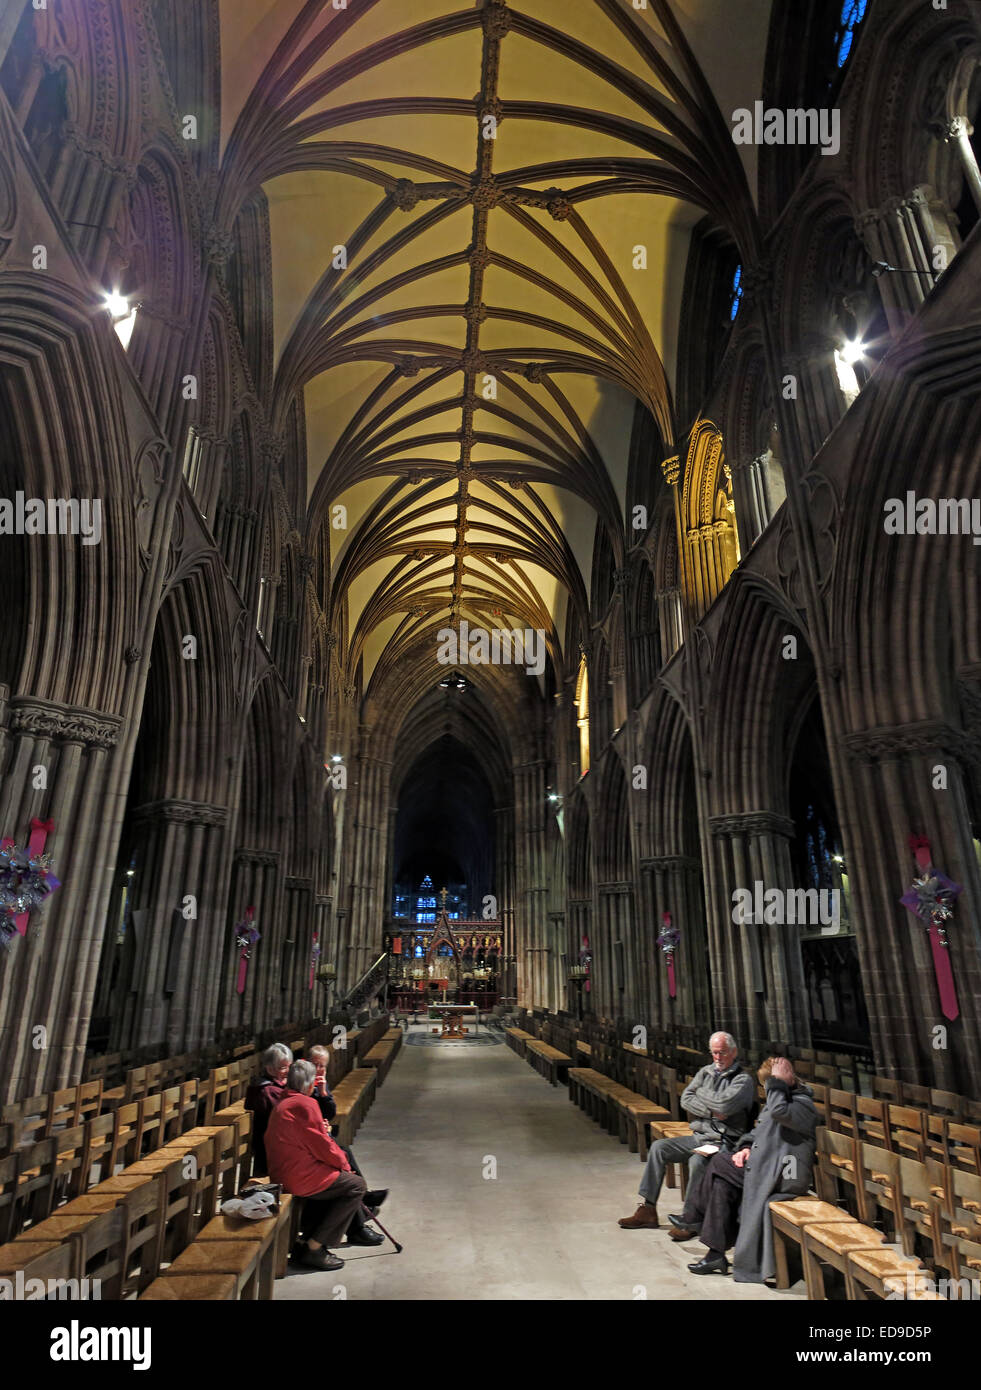 Interior of Lichfield Cathedral, Staffordshire, England, UK, at dusk Stock Photo